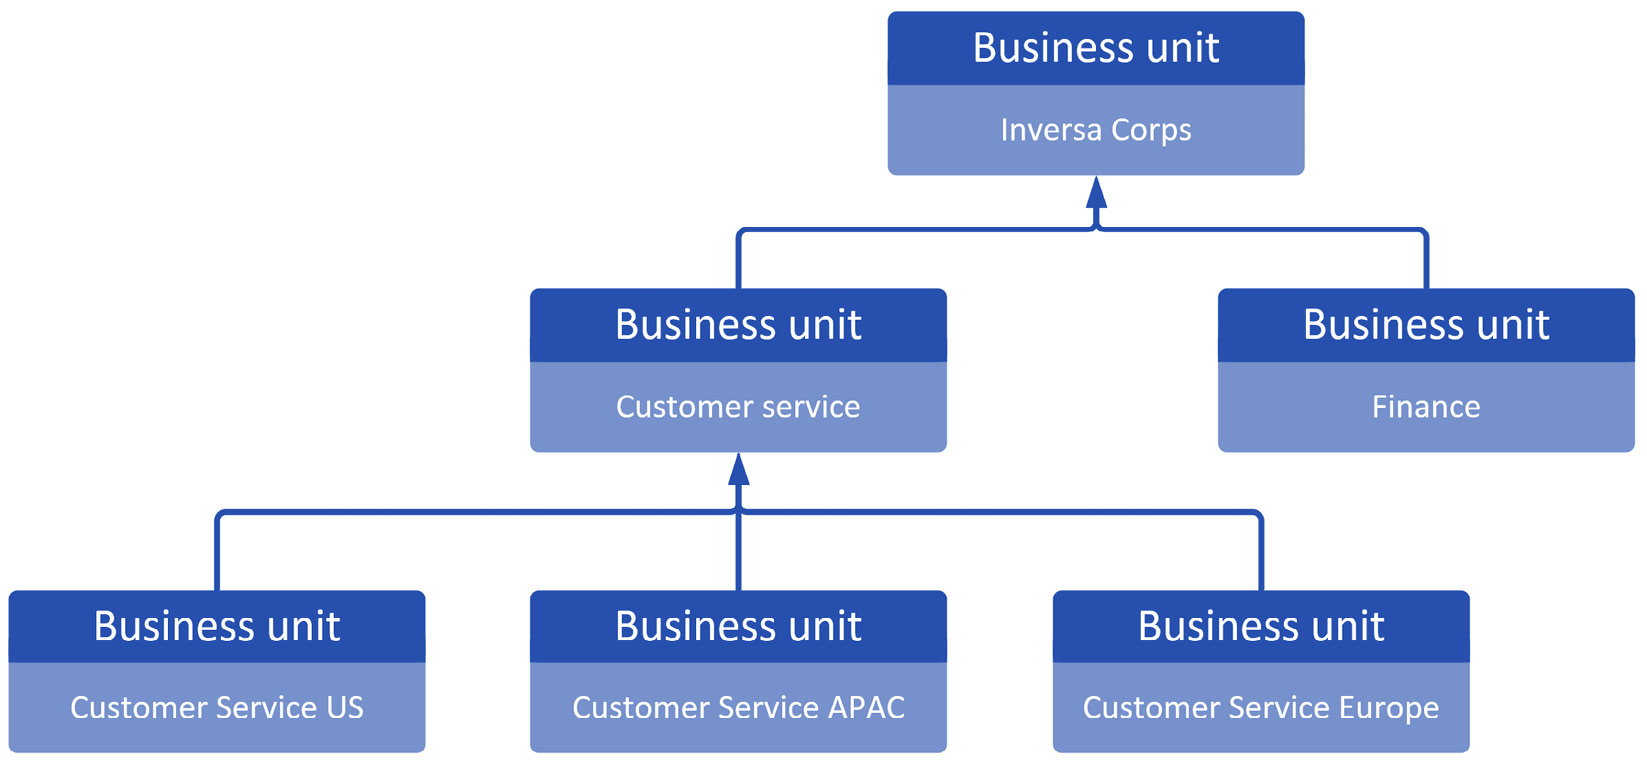 Image 11.12 – Example Dataverse business unit structure
